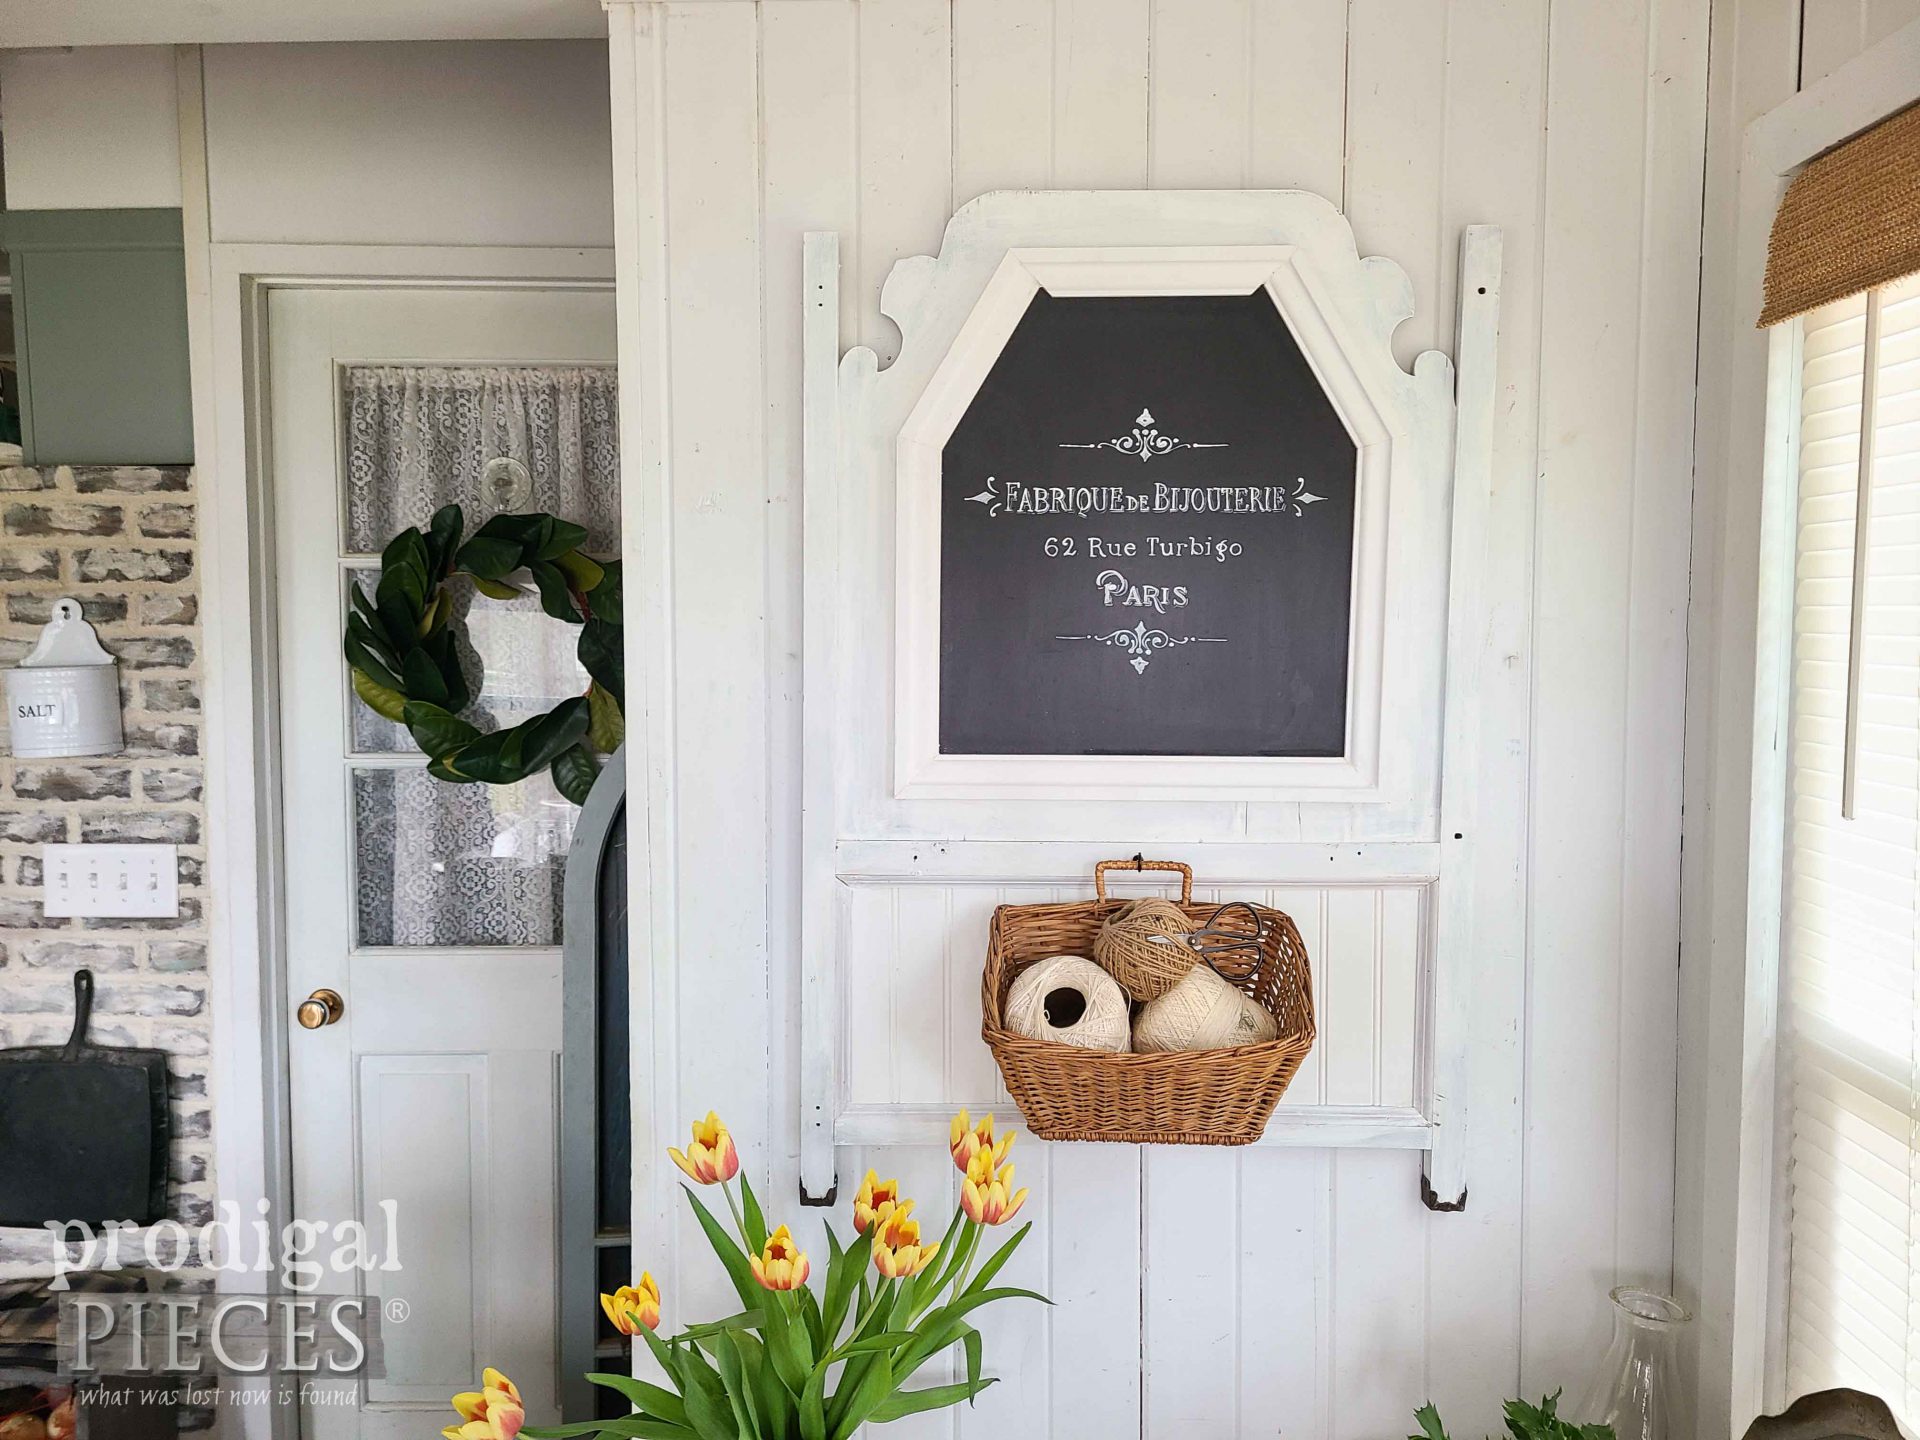 French Farmhouse Jewelry Factory Sign from Vintage Baby Crib Upcycled by Larissa of Prodigal Pieces | prodigalpieces.com #prodigalpieces #french #farmhouse